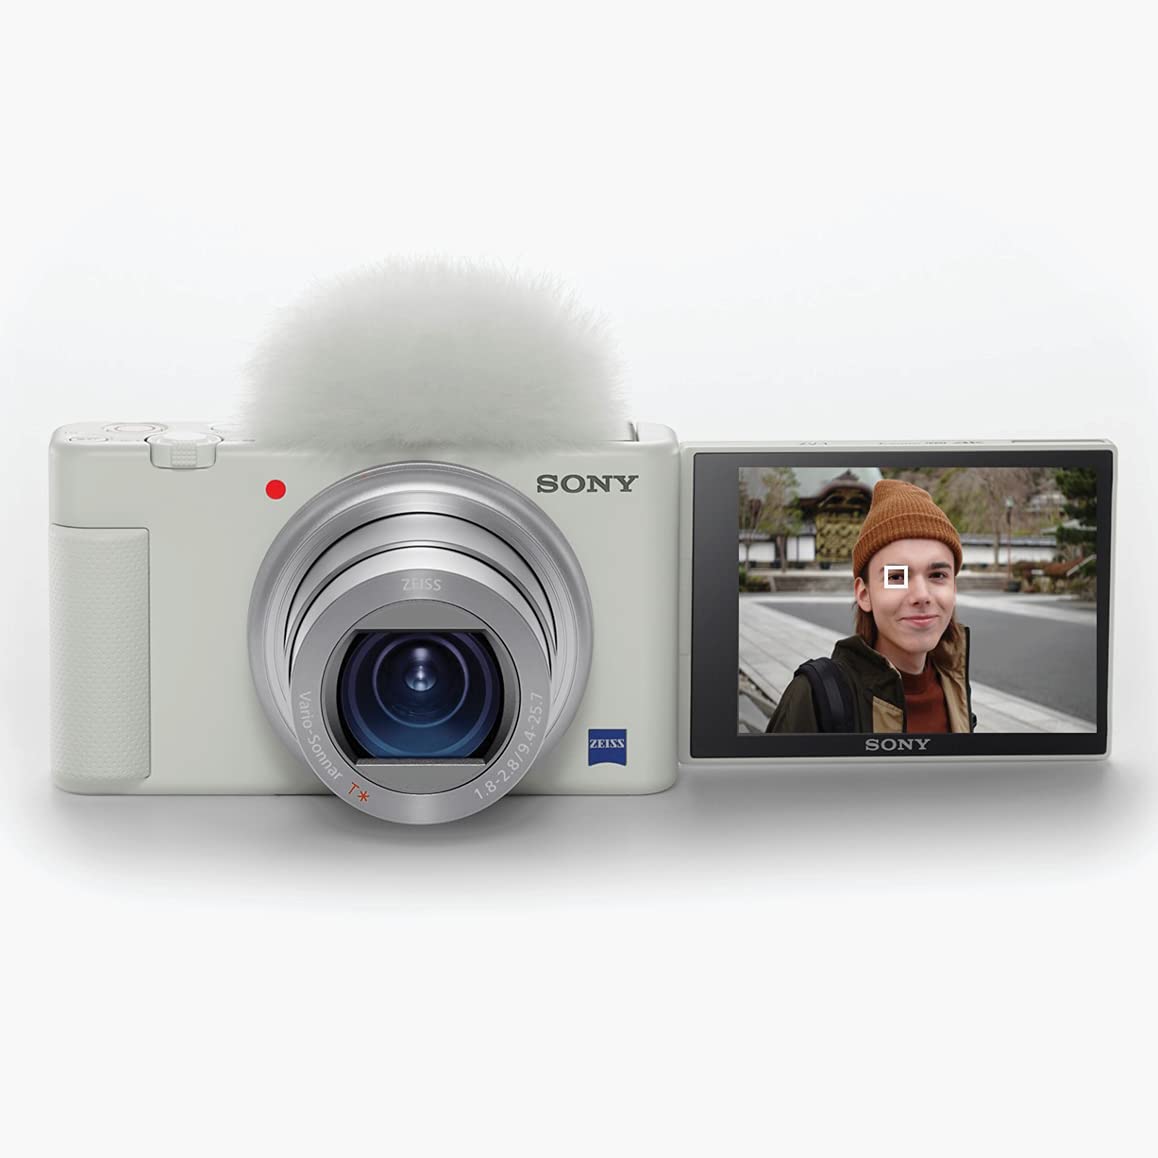  Sony ZV-1 Digital Camera for Content Creators, Vlogging and   with Flip Screen, Built-in Microphone, 4K HDR Video, Touchscreen  Display, Live Video Streaming, Webcam : Electronics